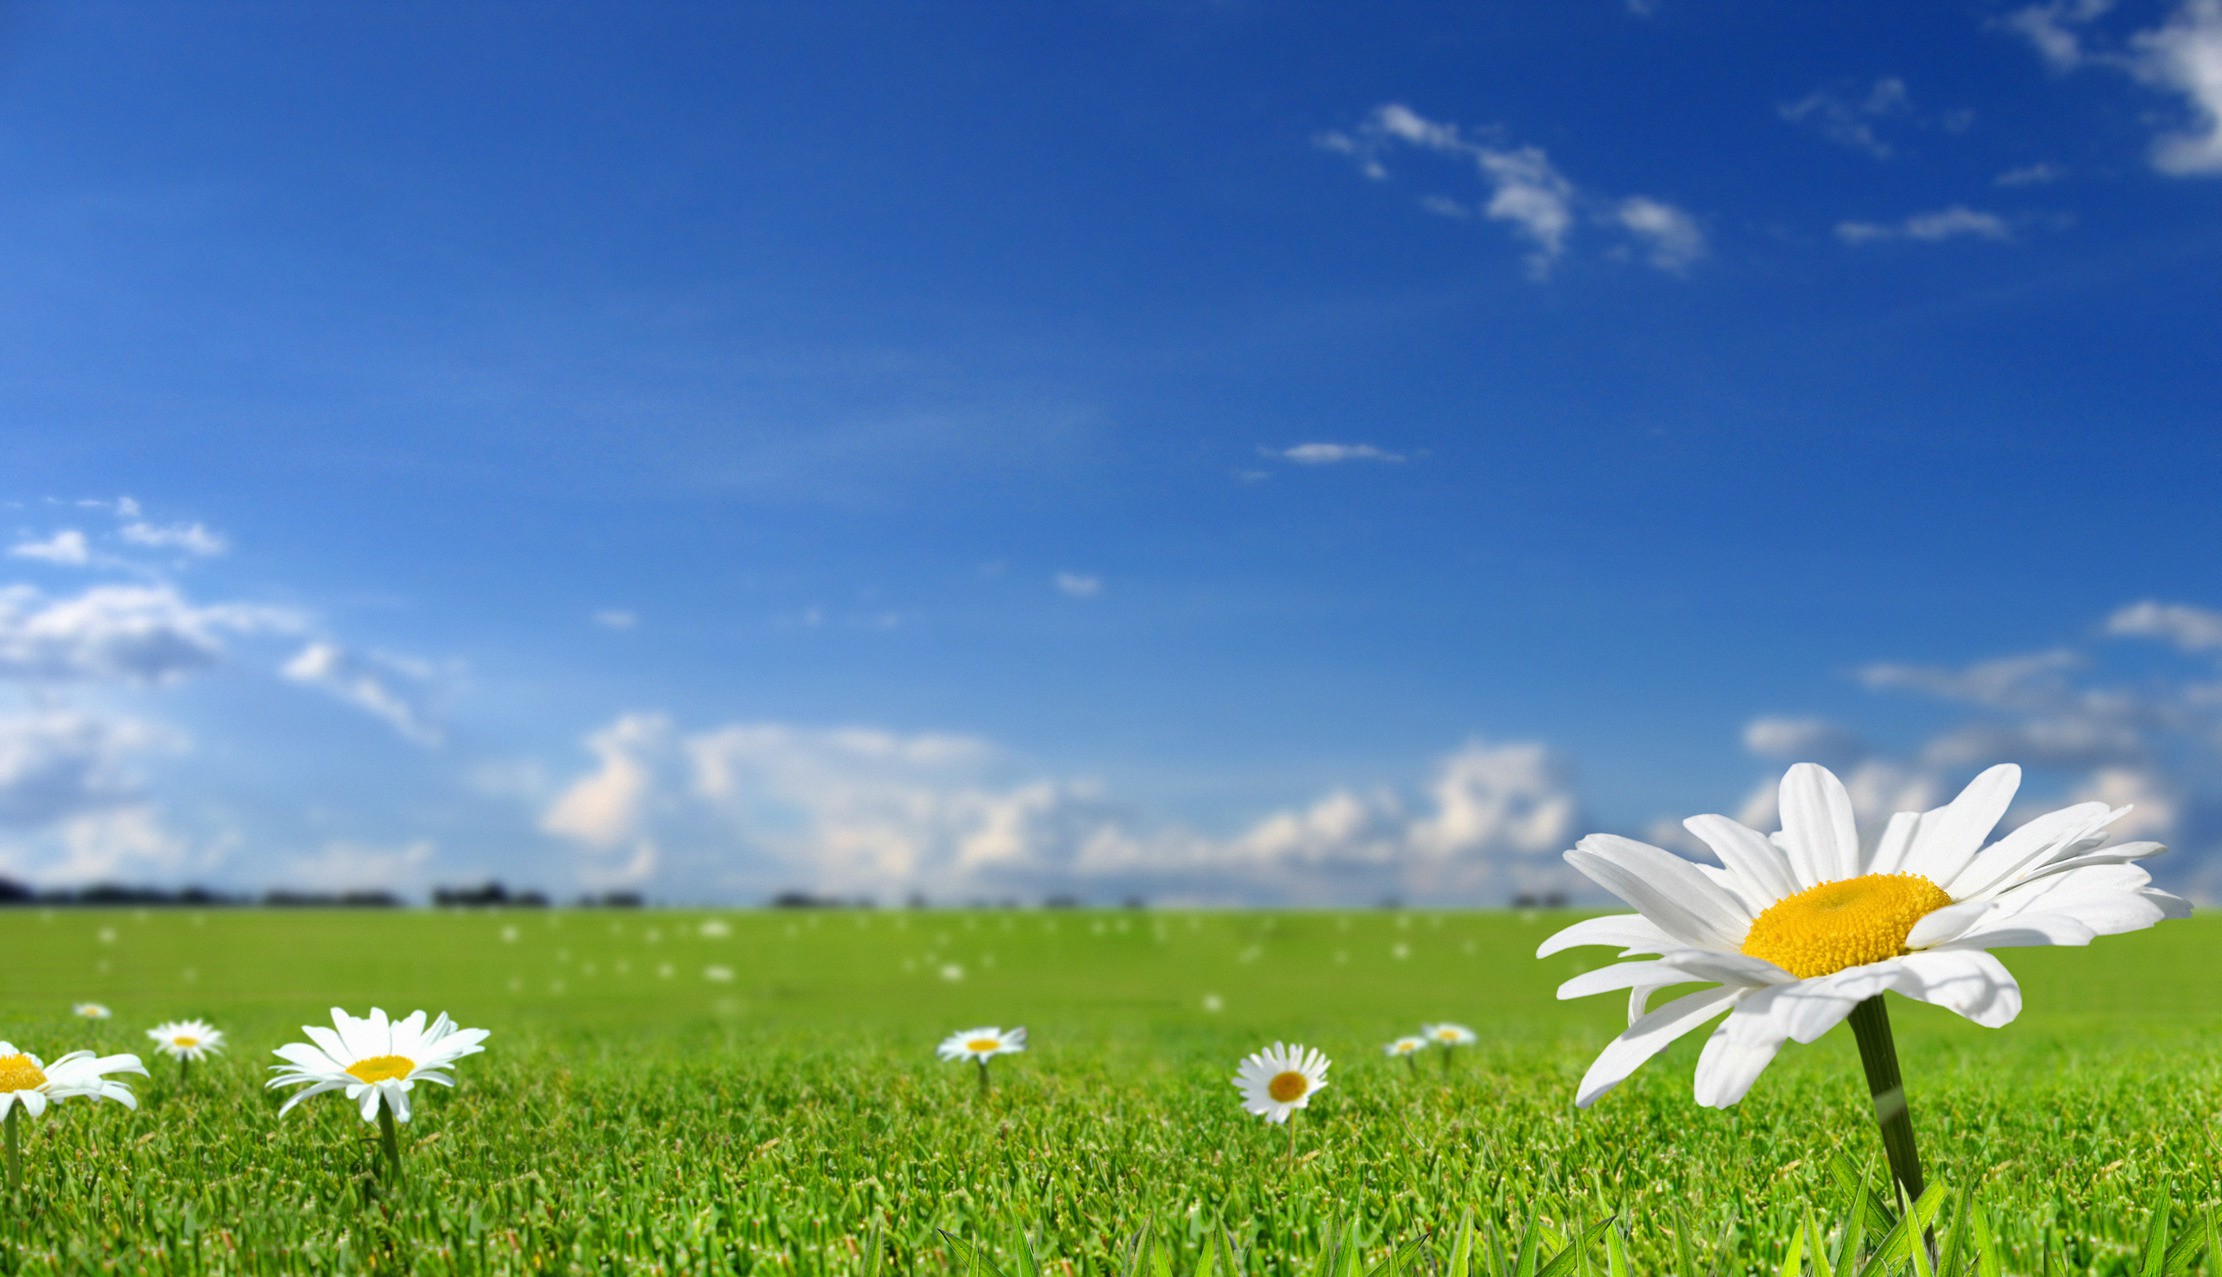 Wallpapers field of daisies daisies grass on the desktop